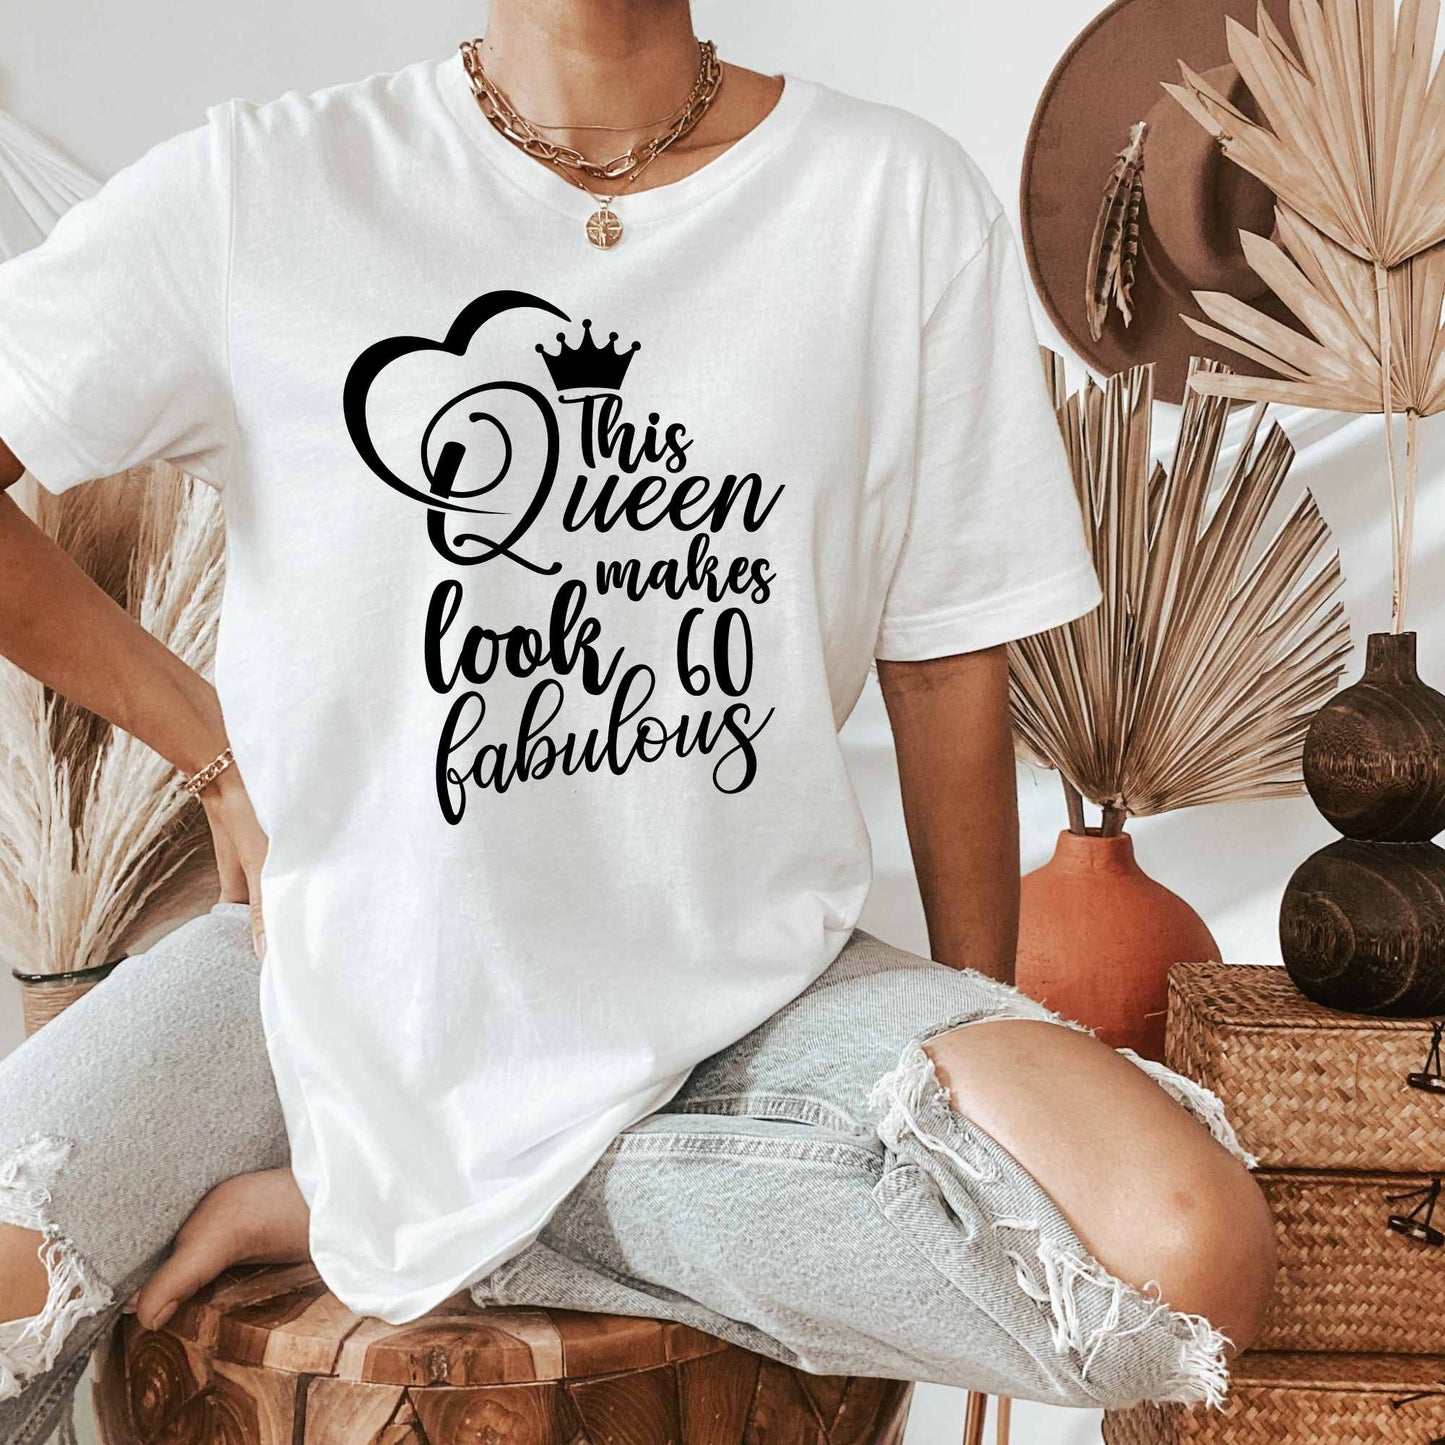 This Queen Makes 60 Look Fabulous, 60 Birthday Shirt for Women, Gift for 60th Birthday Party